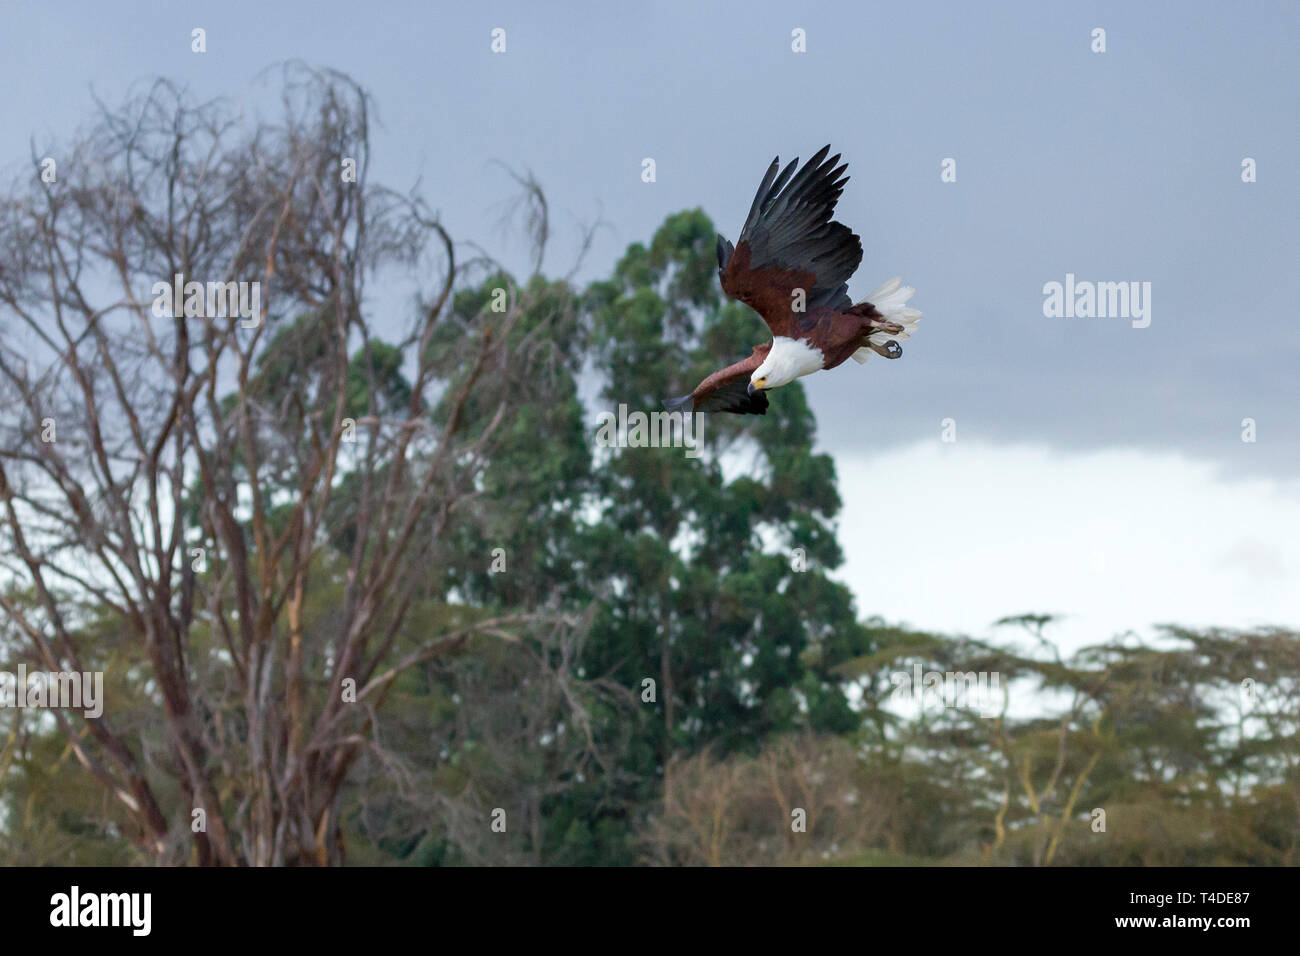 An african fish eagle wheeling in over a small waterhole to catch a catfish, landscape format, Ol Pejeta Conservancy, Laikipia, Kenya, Africa Stock Photo